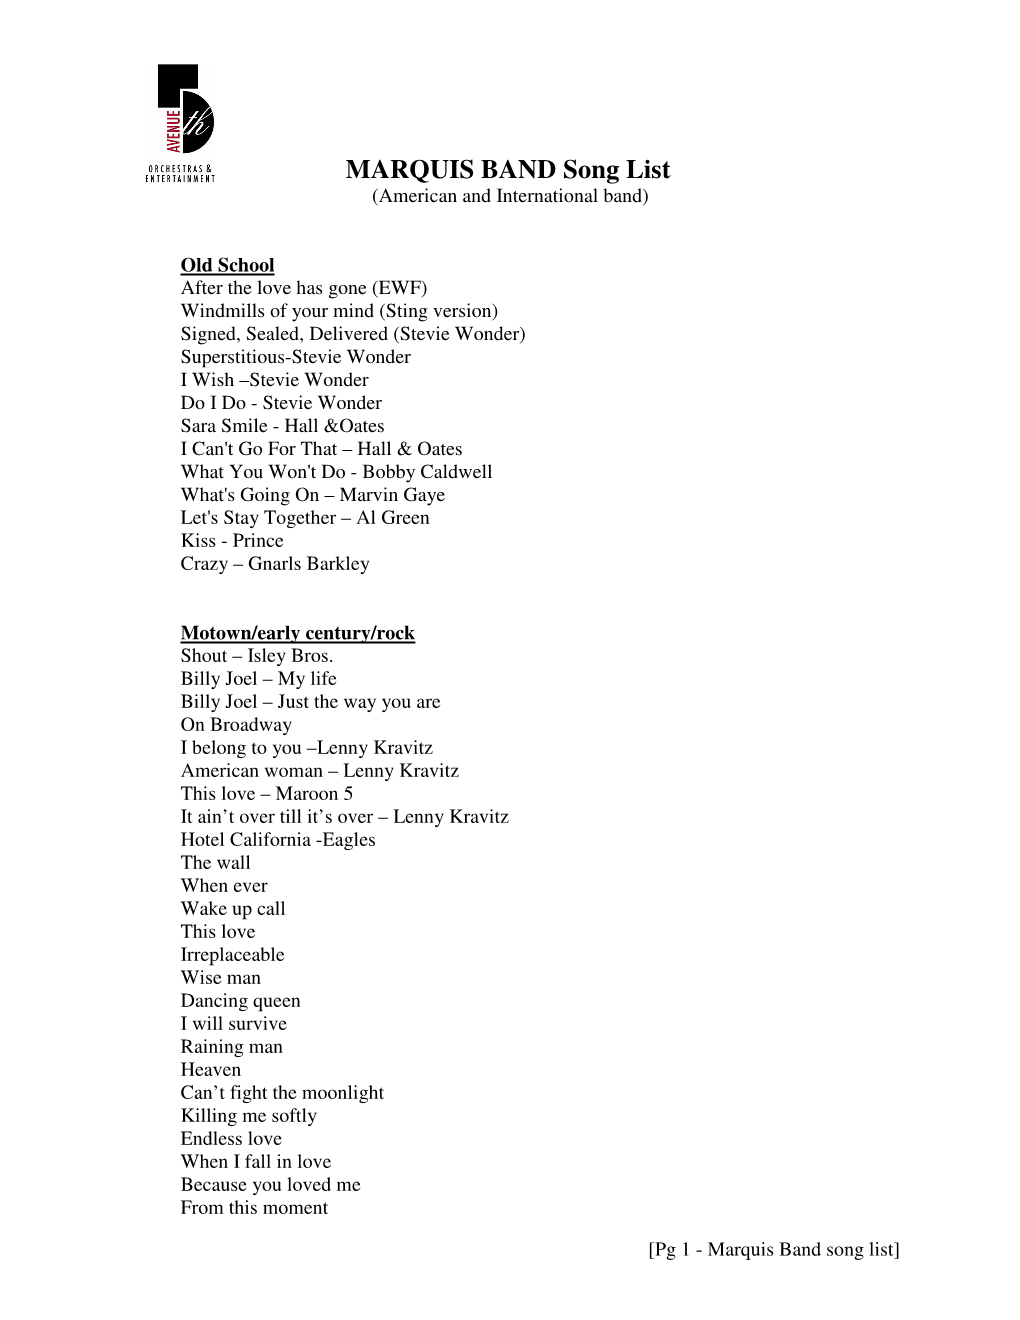 MARQUIS BAND Song List (American and International Band)